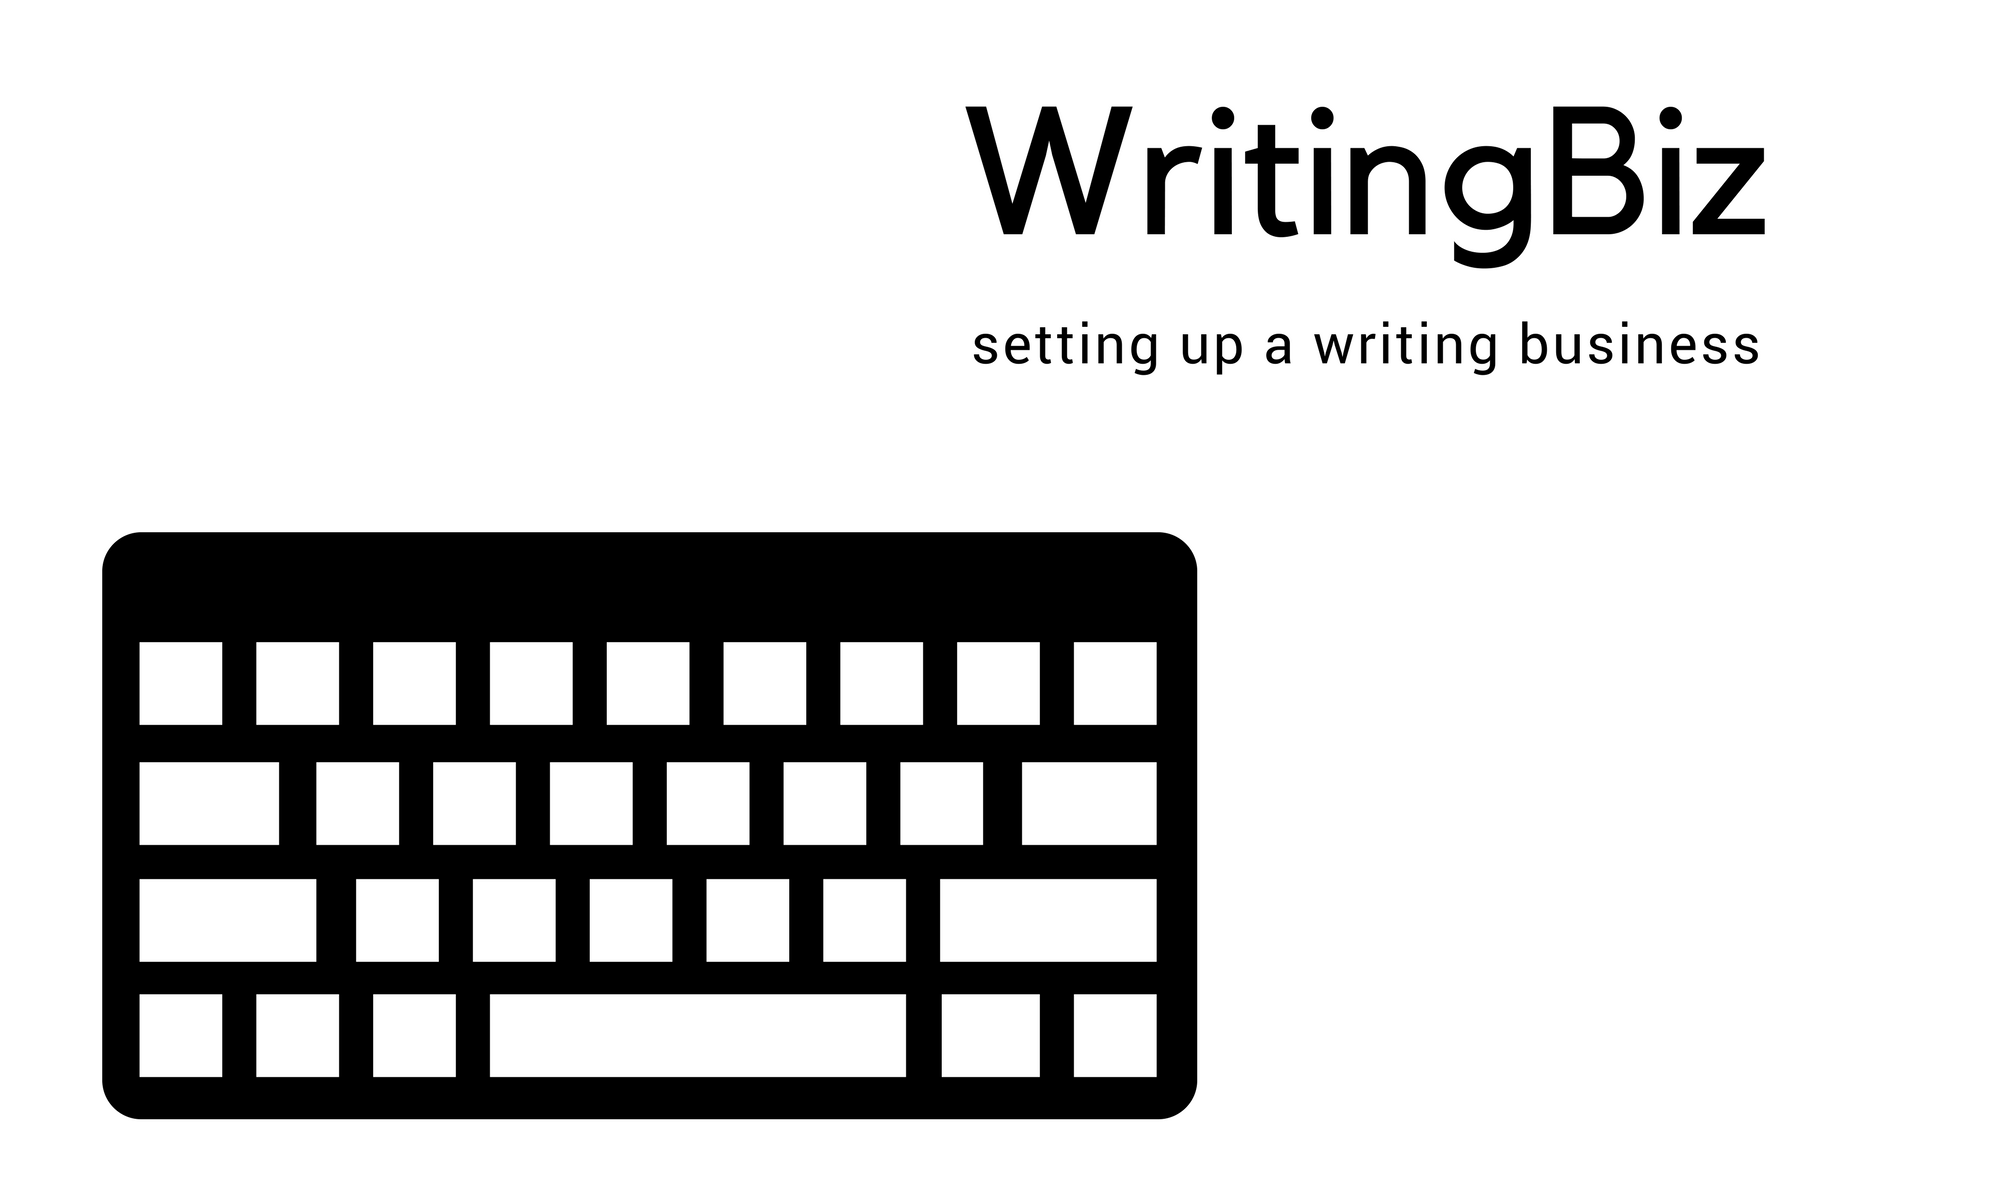 Set up your own writing business